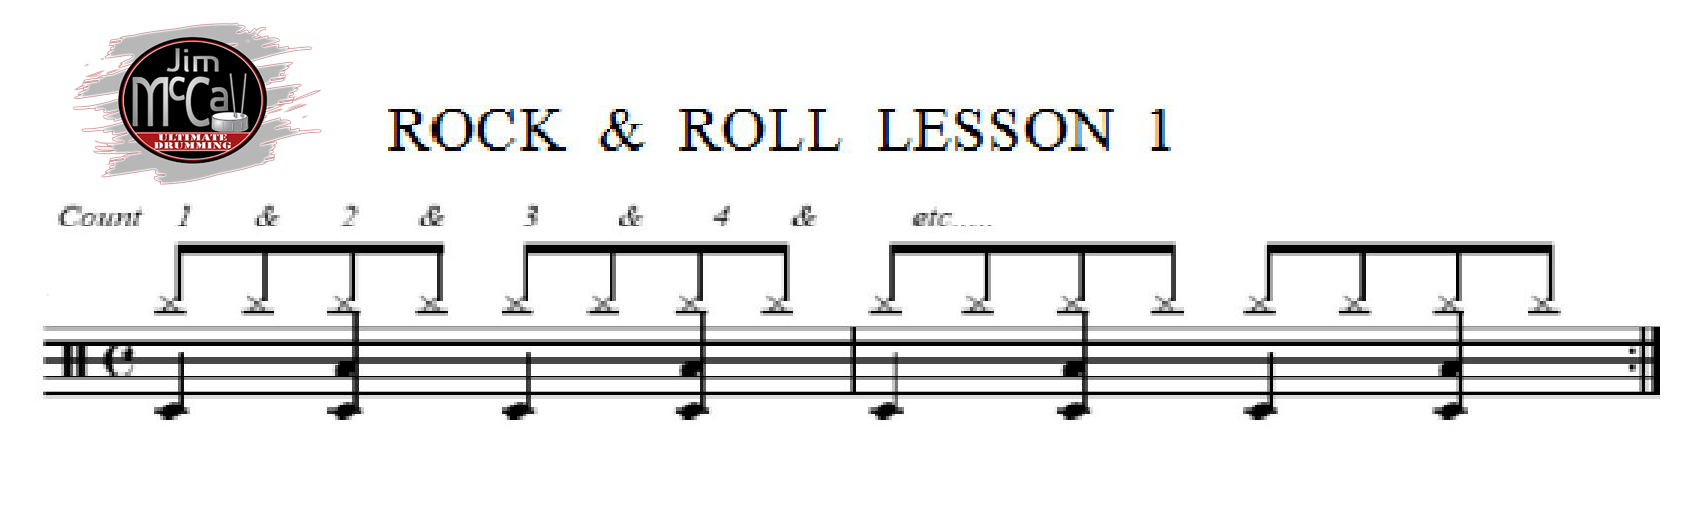 rock_roll_chart_1 Ultimate Drumming